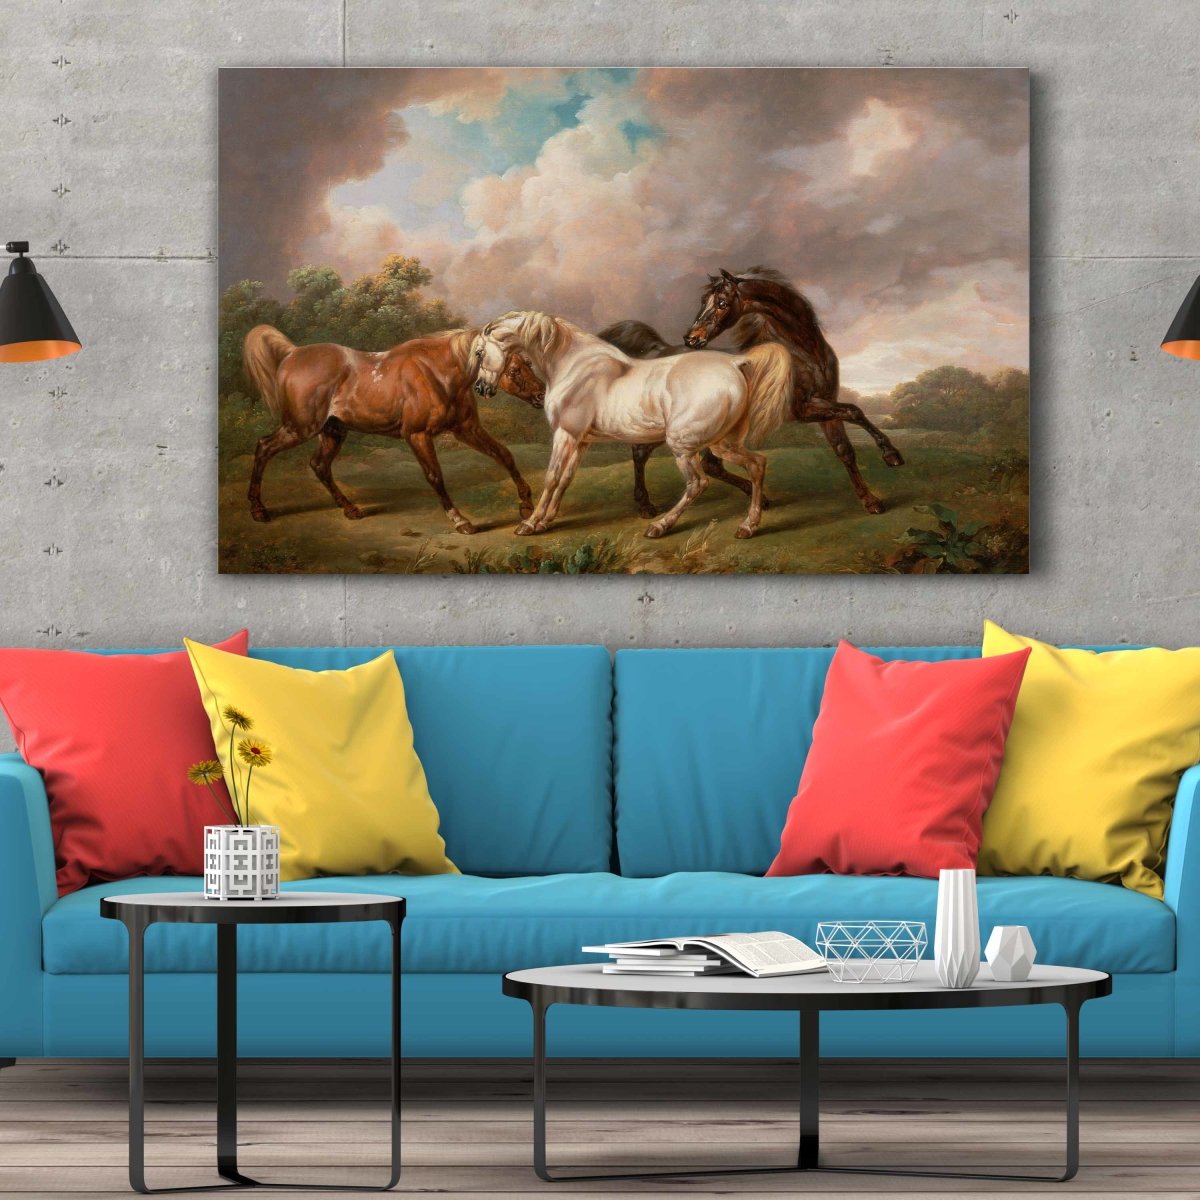 Tablou Canvas Three Horses in a Stormy Landscape by Charles Towne - clevny.ro